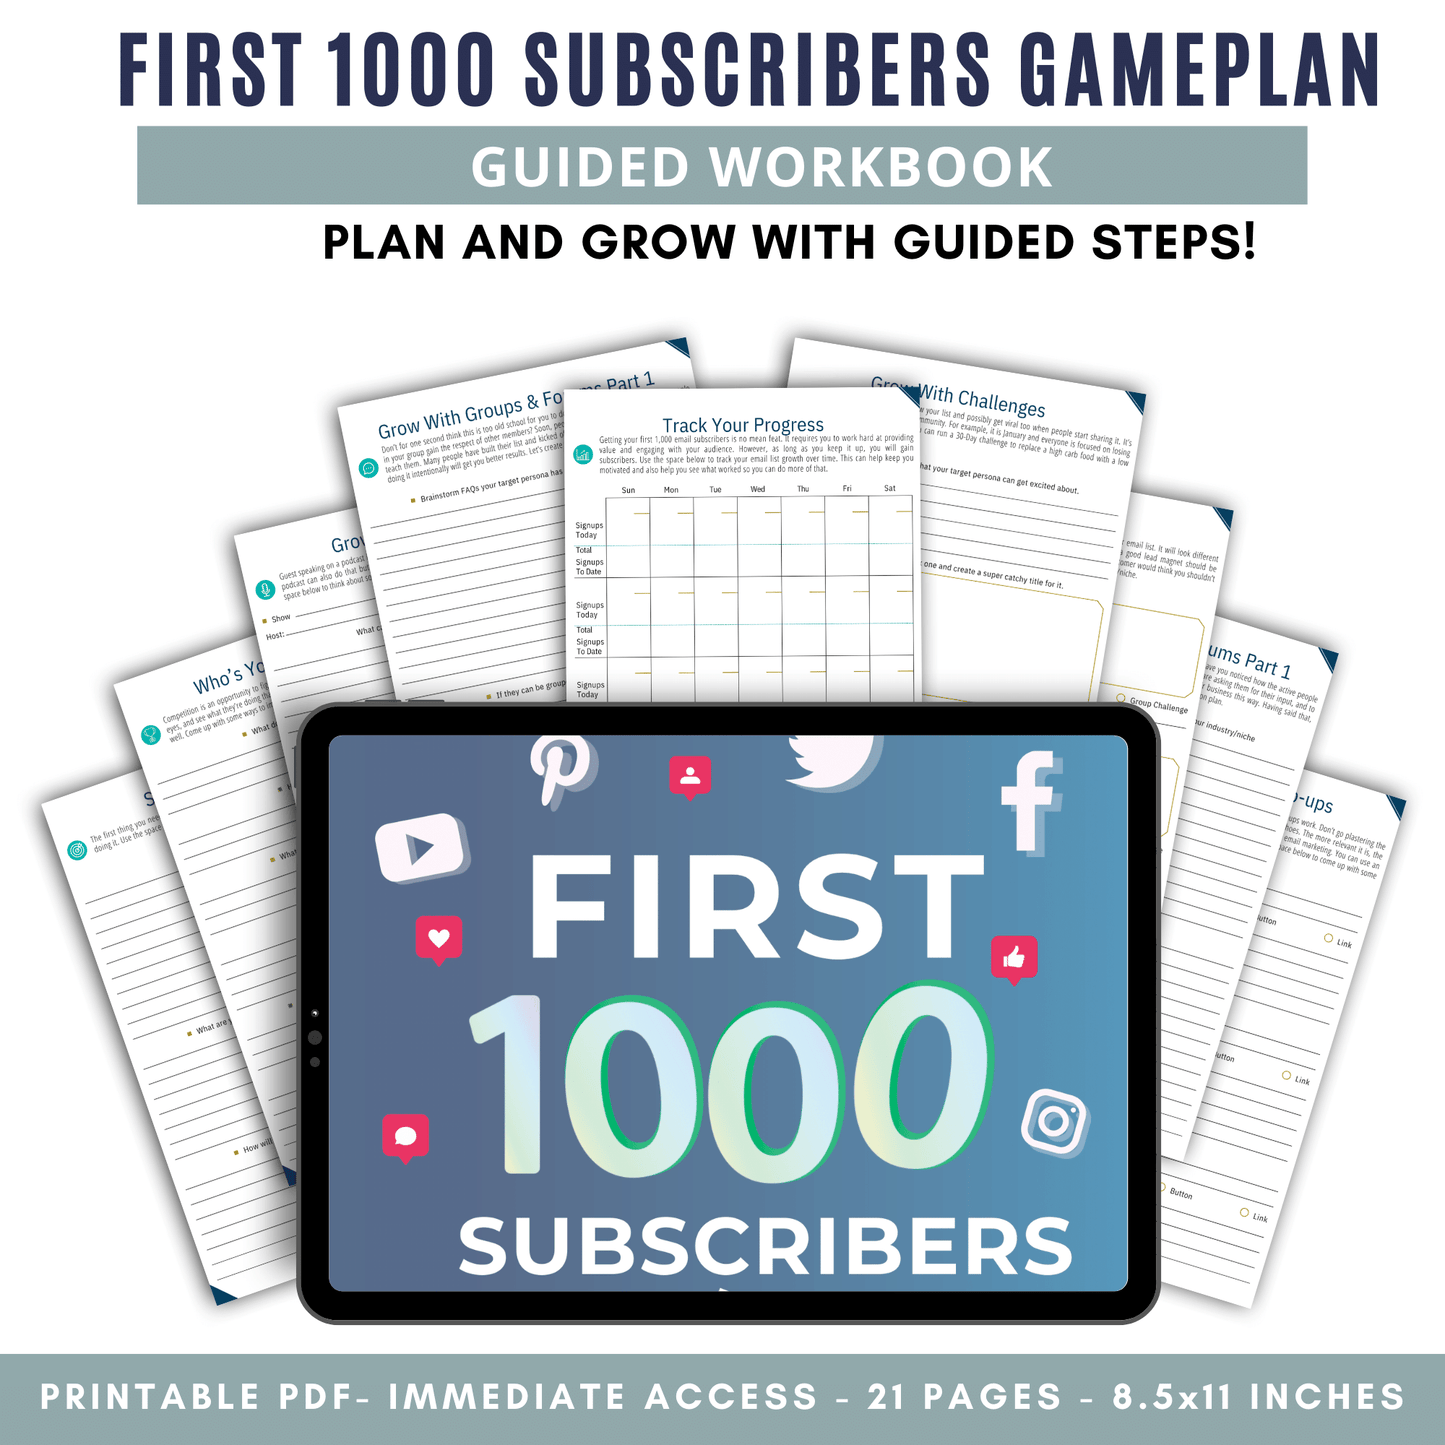 First 1000 Subscribers Workbook